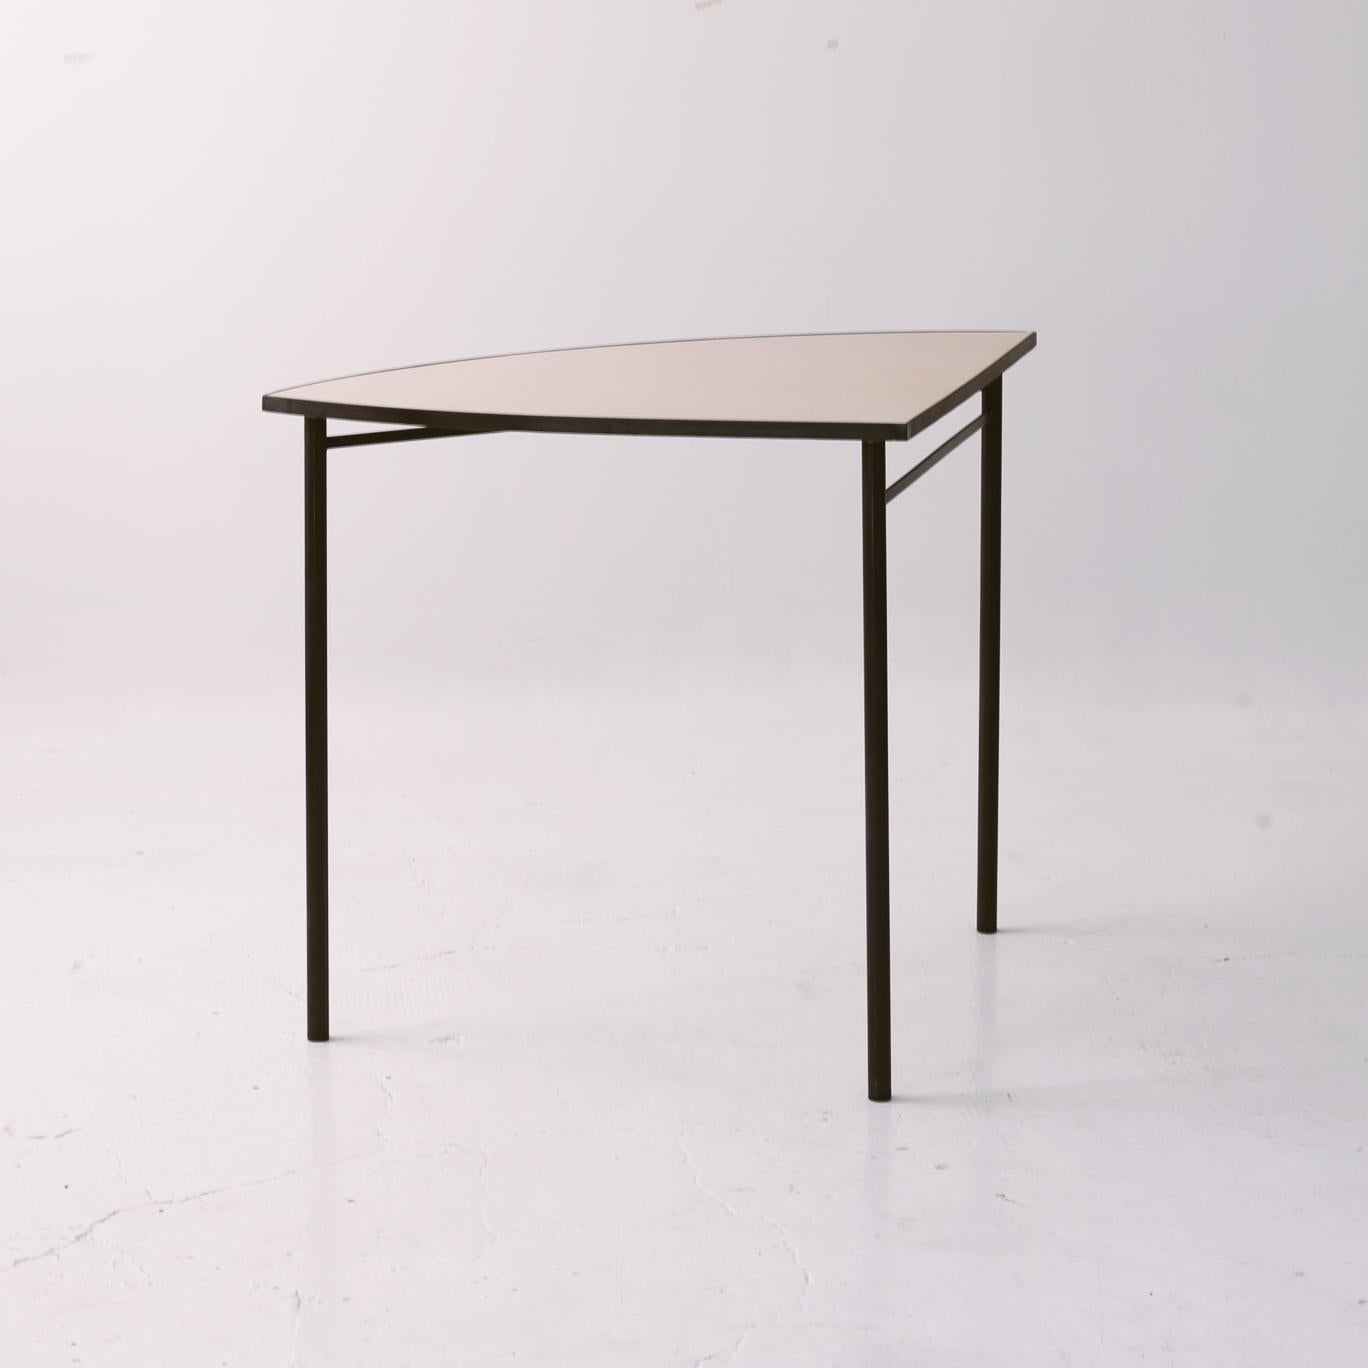 Piece E Tabula [non] Rasa table by Studio Traccia
Dimensions: W 80 x D 80 x H 74 cm
Materials: steel.
Different combinations are available.

The table was designed for our installation called tabula[non]rasa developed for Milan Design Week